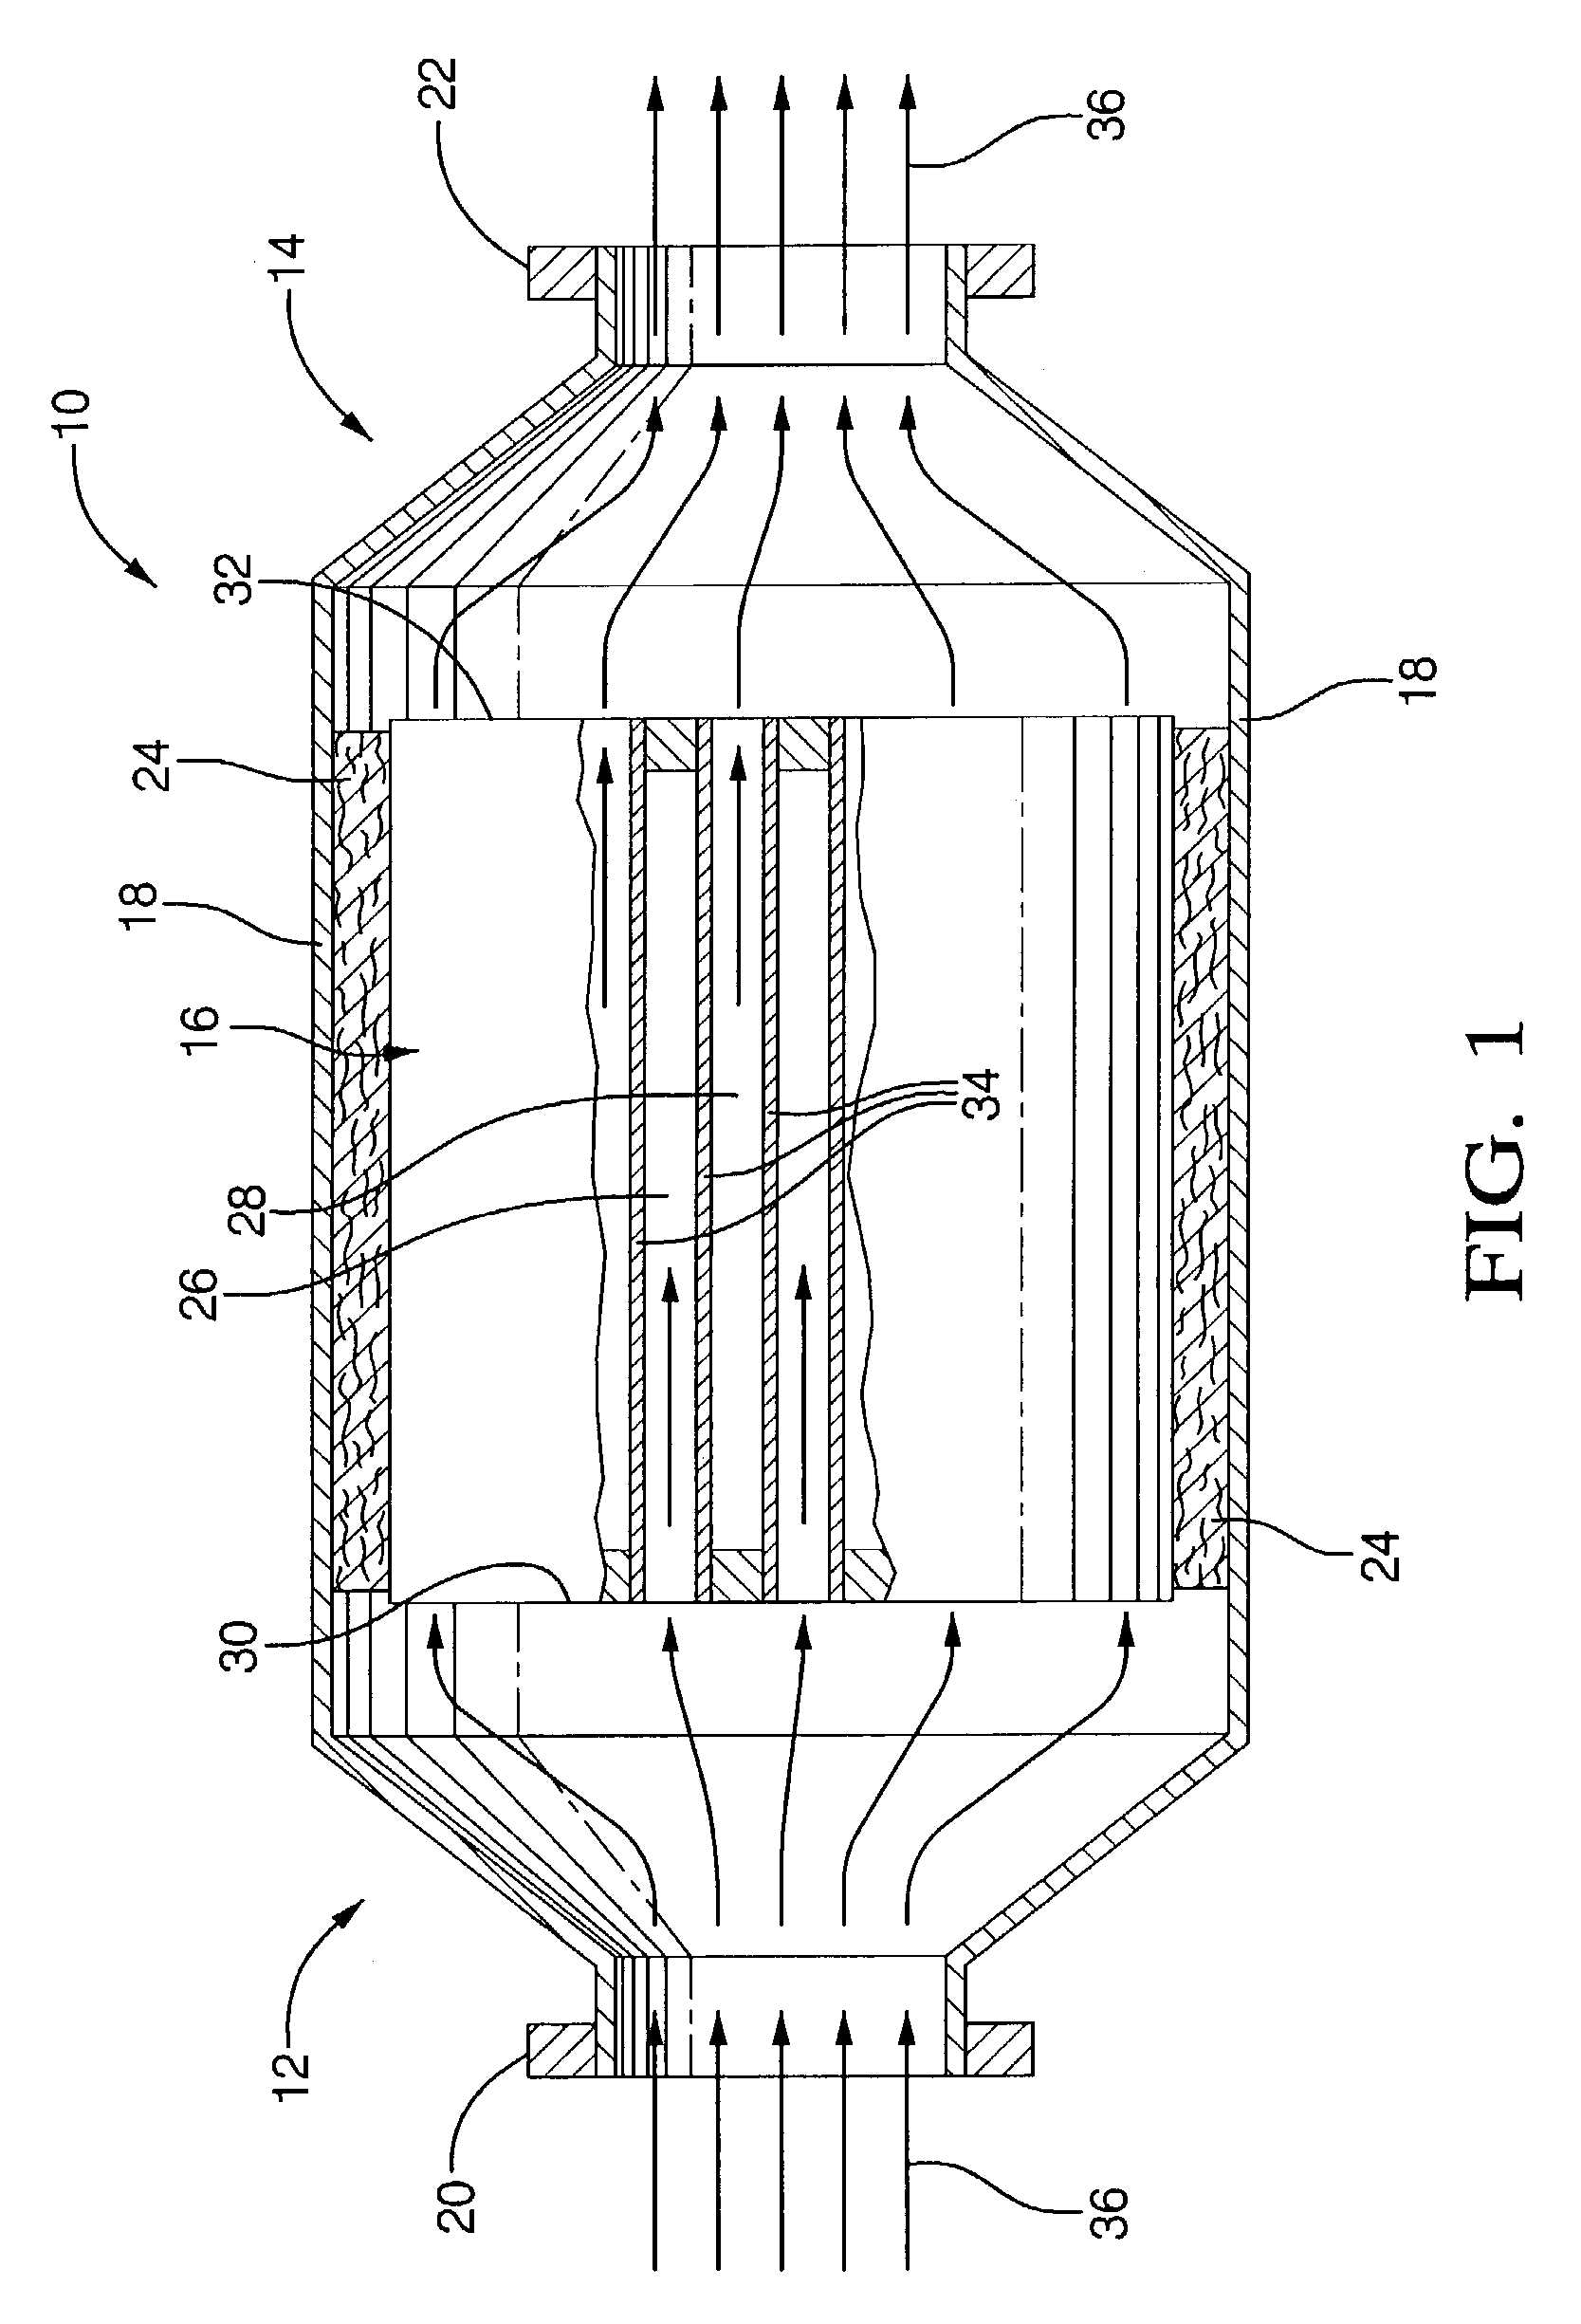 Method for control of washcoat distribution along channels of a particulate filter substrate